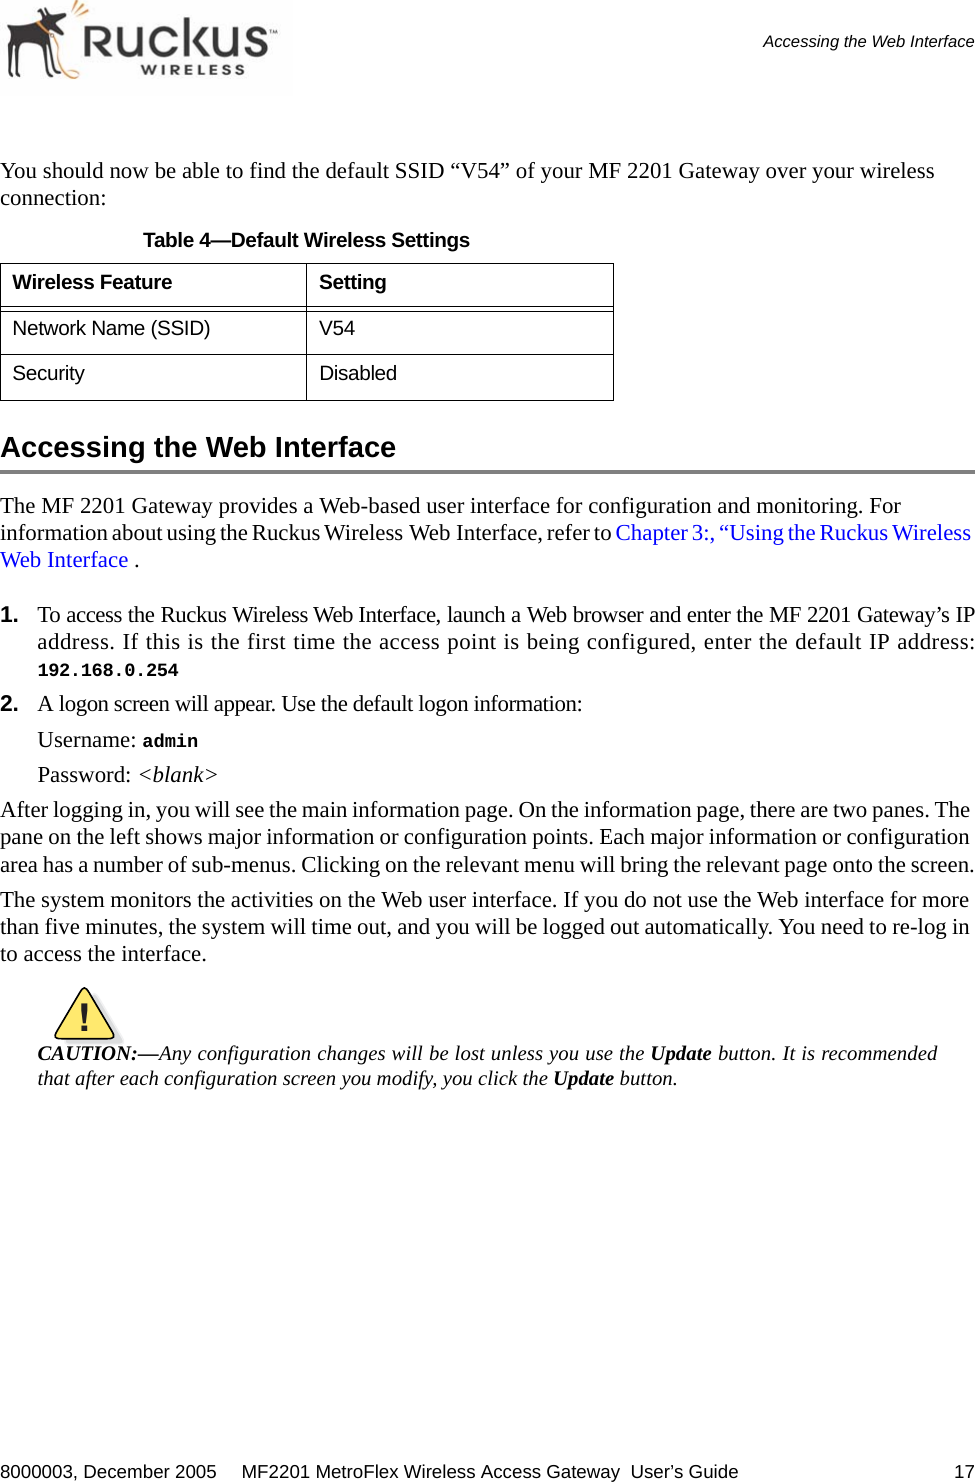 8000003, December 2005  MF2201 MetroFlex Wireless Access Gateway  User’s Guide 17Accessing the Web InterfaceYou should now be able to find the default SSID “V54” of your MF 2201 Gateway over your wireless connection:Accessing the Web InterfaceThe MF 2201 Gateway provides a Web-based user interface for configuration and monitoring. For information about using the Ruckus Wireless Web Interface, refer to Chapter 3:, “Using the Ruckus Wireless Web Interface .1. To access the Ruckus Wireless Web Interface, launch a Web browser and enter the MF 2201 Gateway’s IPaddress. If this is the first time the access point is being configured, enter the default IP address:192.168.0.2542. A logon screen will appear. Use the default logon information:Username: adminPassword: &lt;blank&gt;After logging in, you will see the main information page. On the information page, there are two panes. The pane on the left shows major information or configuration points. Each major information or configuration area has a number of sub-menus. Clicking on the relevant menu will bring the relevant page onto the screen.The system monitors the activities on the Web user interface. If you do not use the Web interface for more than five minutes, the system will time out, and you will be logged out automatically. You need to re-log in to access the interface.!CAUTION:—Any configuration changes will be lost unless you use the Update button. It is recommendedthat after each configuration screen you modify, you click the Update button.Table 4—Default Wireless SettingsWireless Feature SettingNetwork Name (SSID) V54Security Disabled